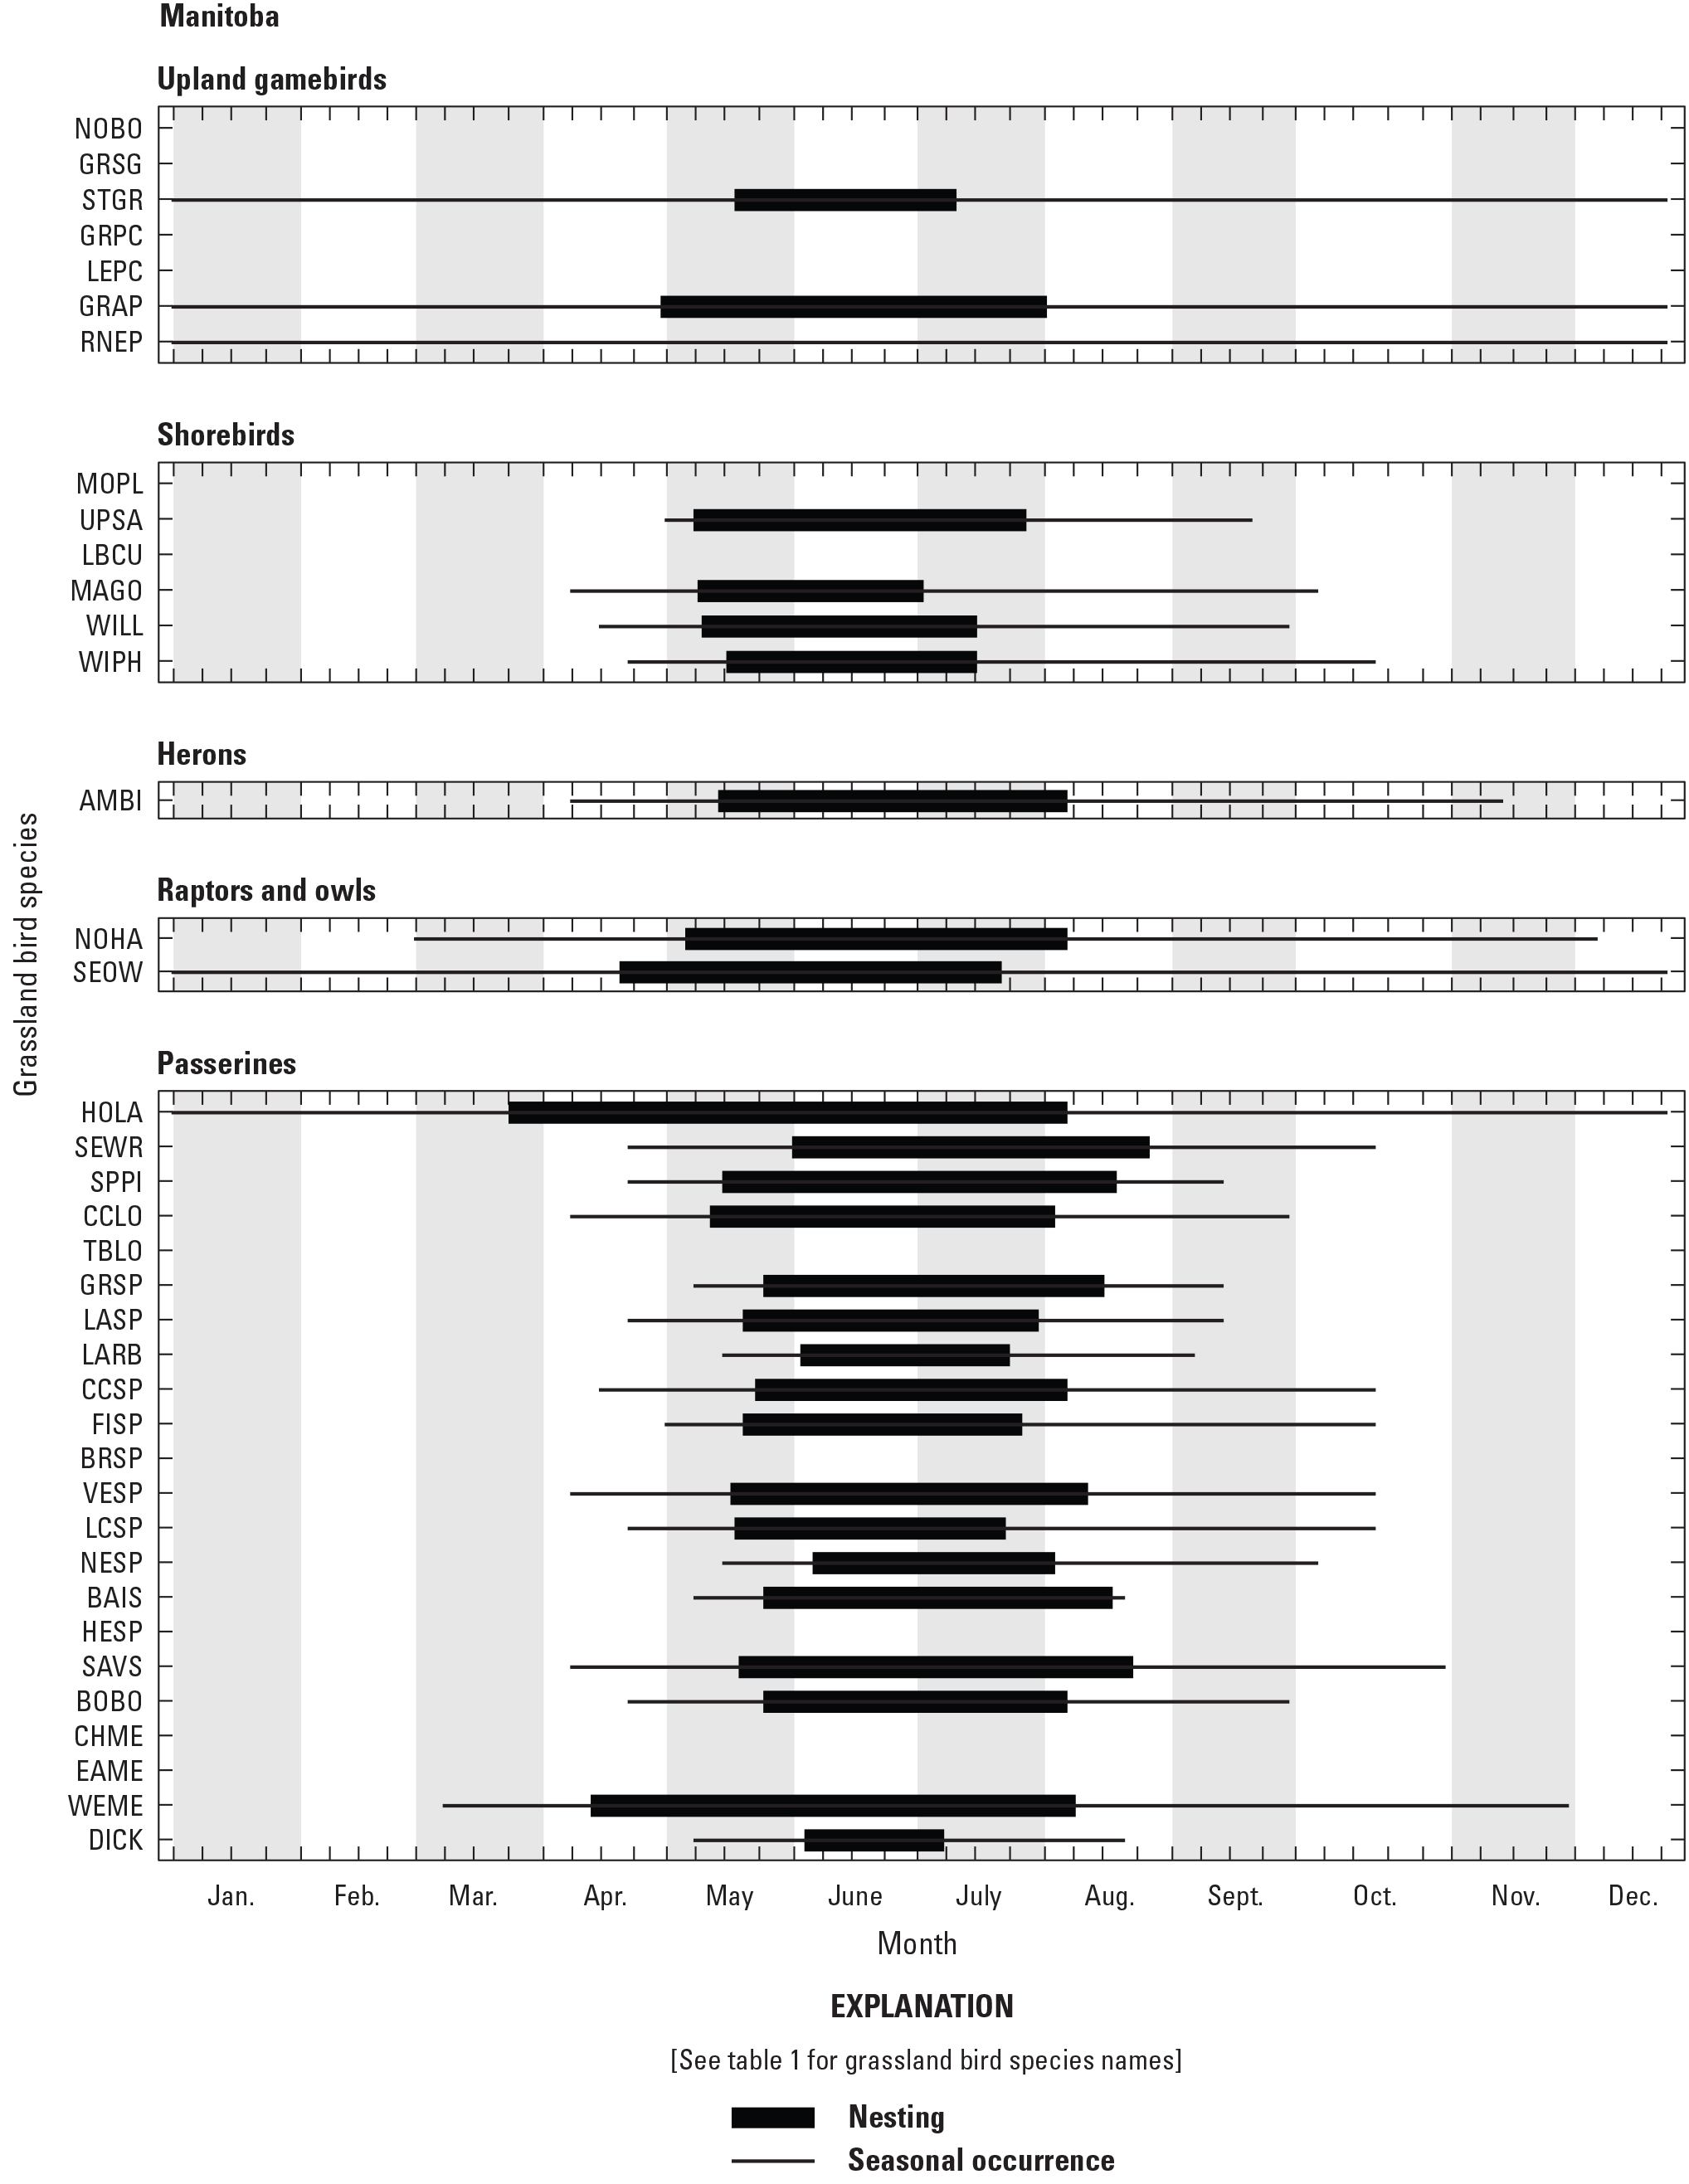 Figure showing seasonal occurrence and nesting phenology for 38 grassland bird species
               in Manitoba, Canada.